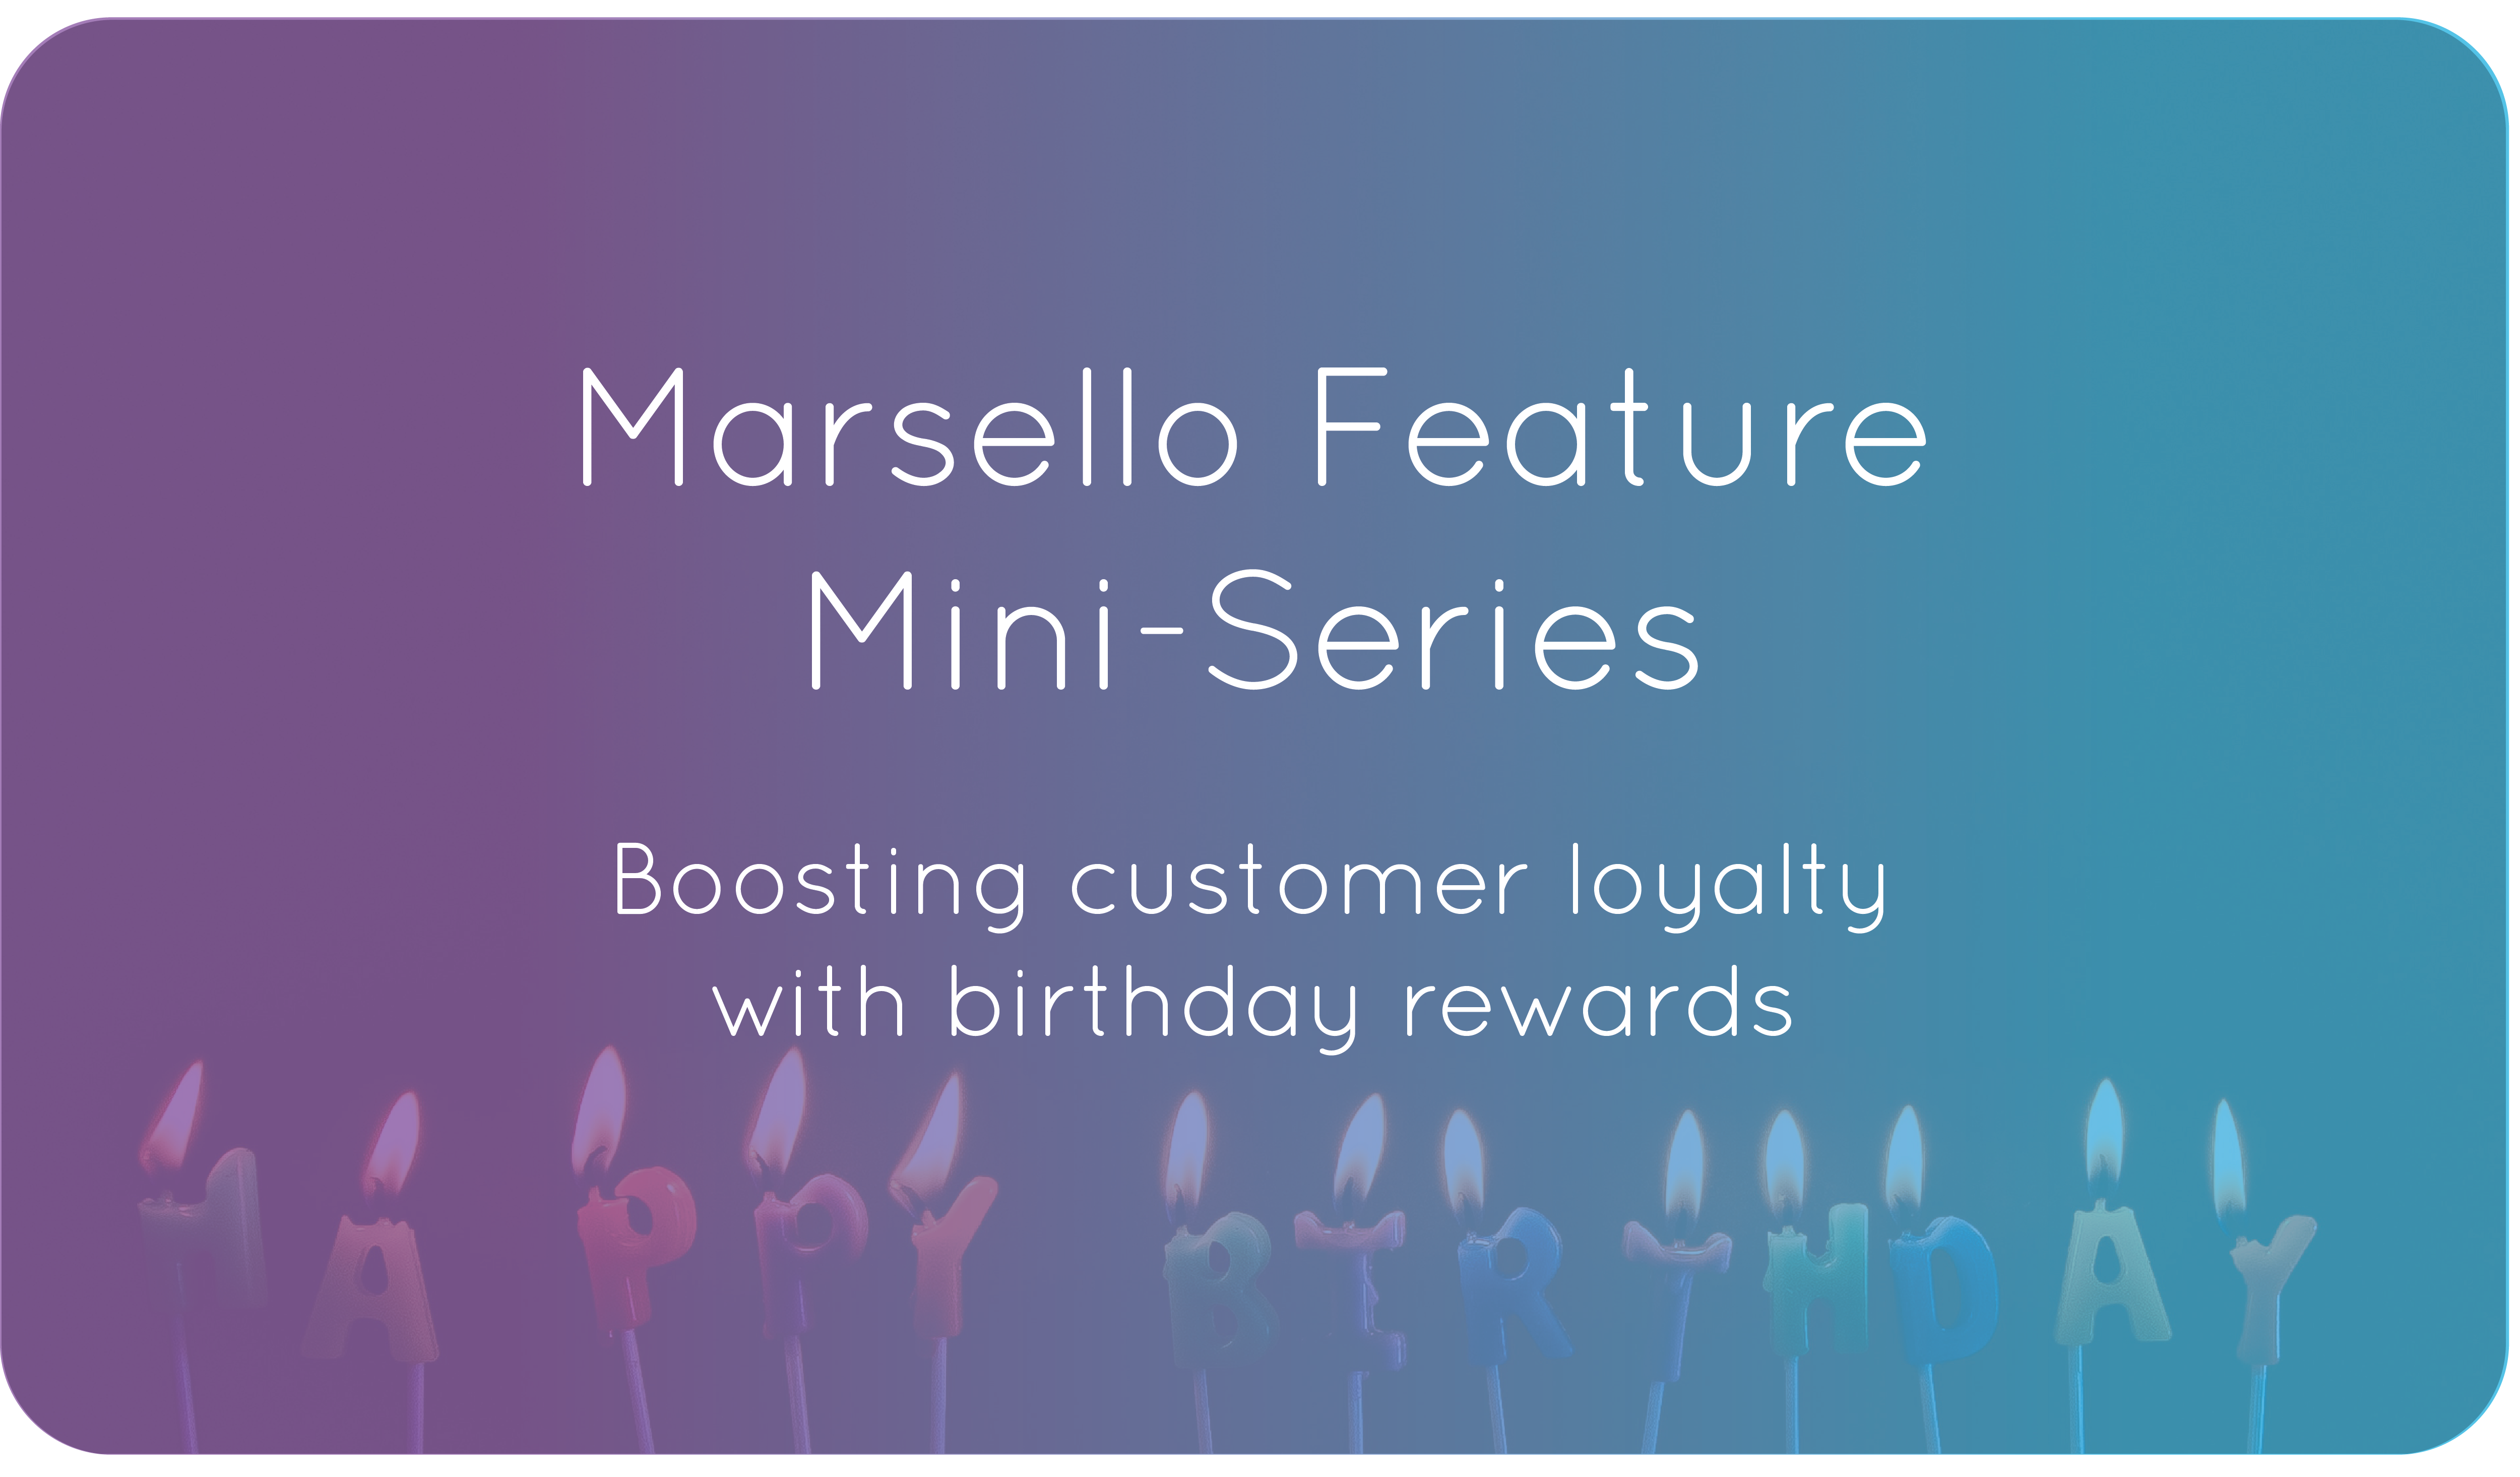 Marsello Feature Mini-Series. Boosting customer loyalty with birthday rewards.